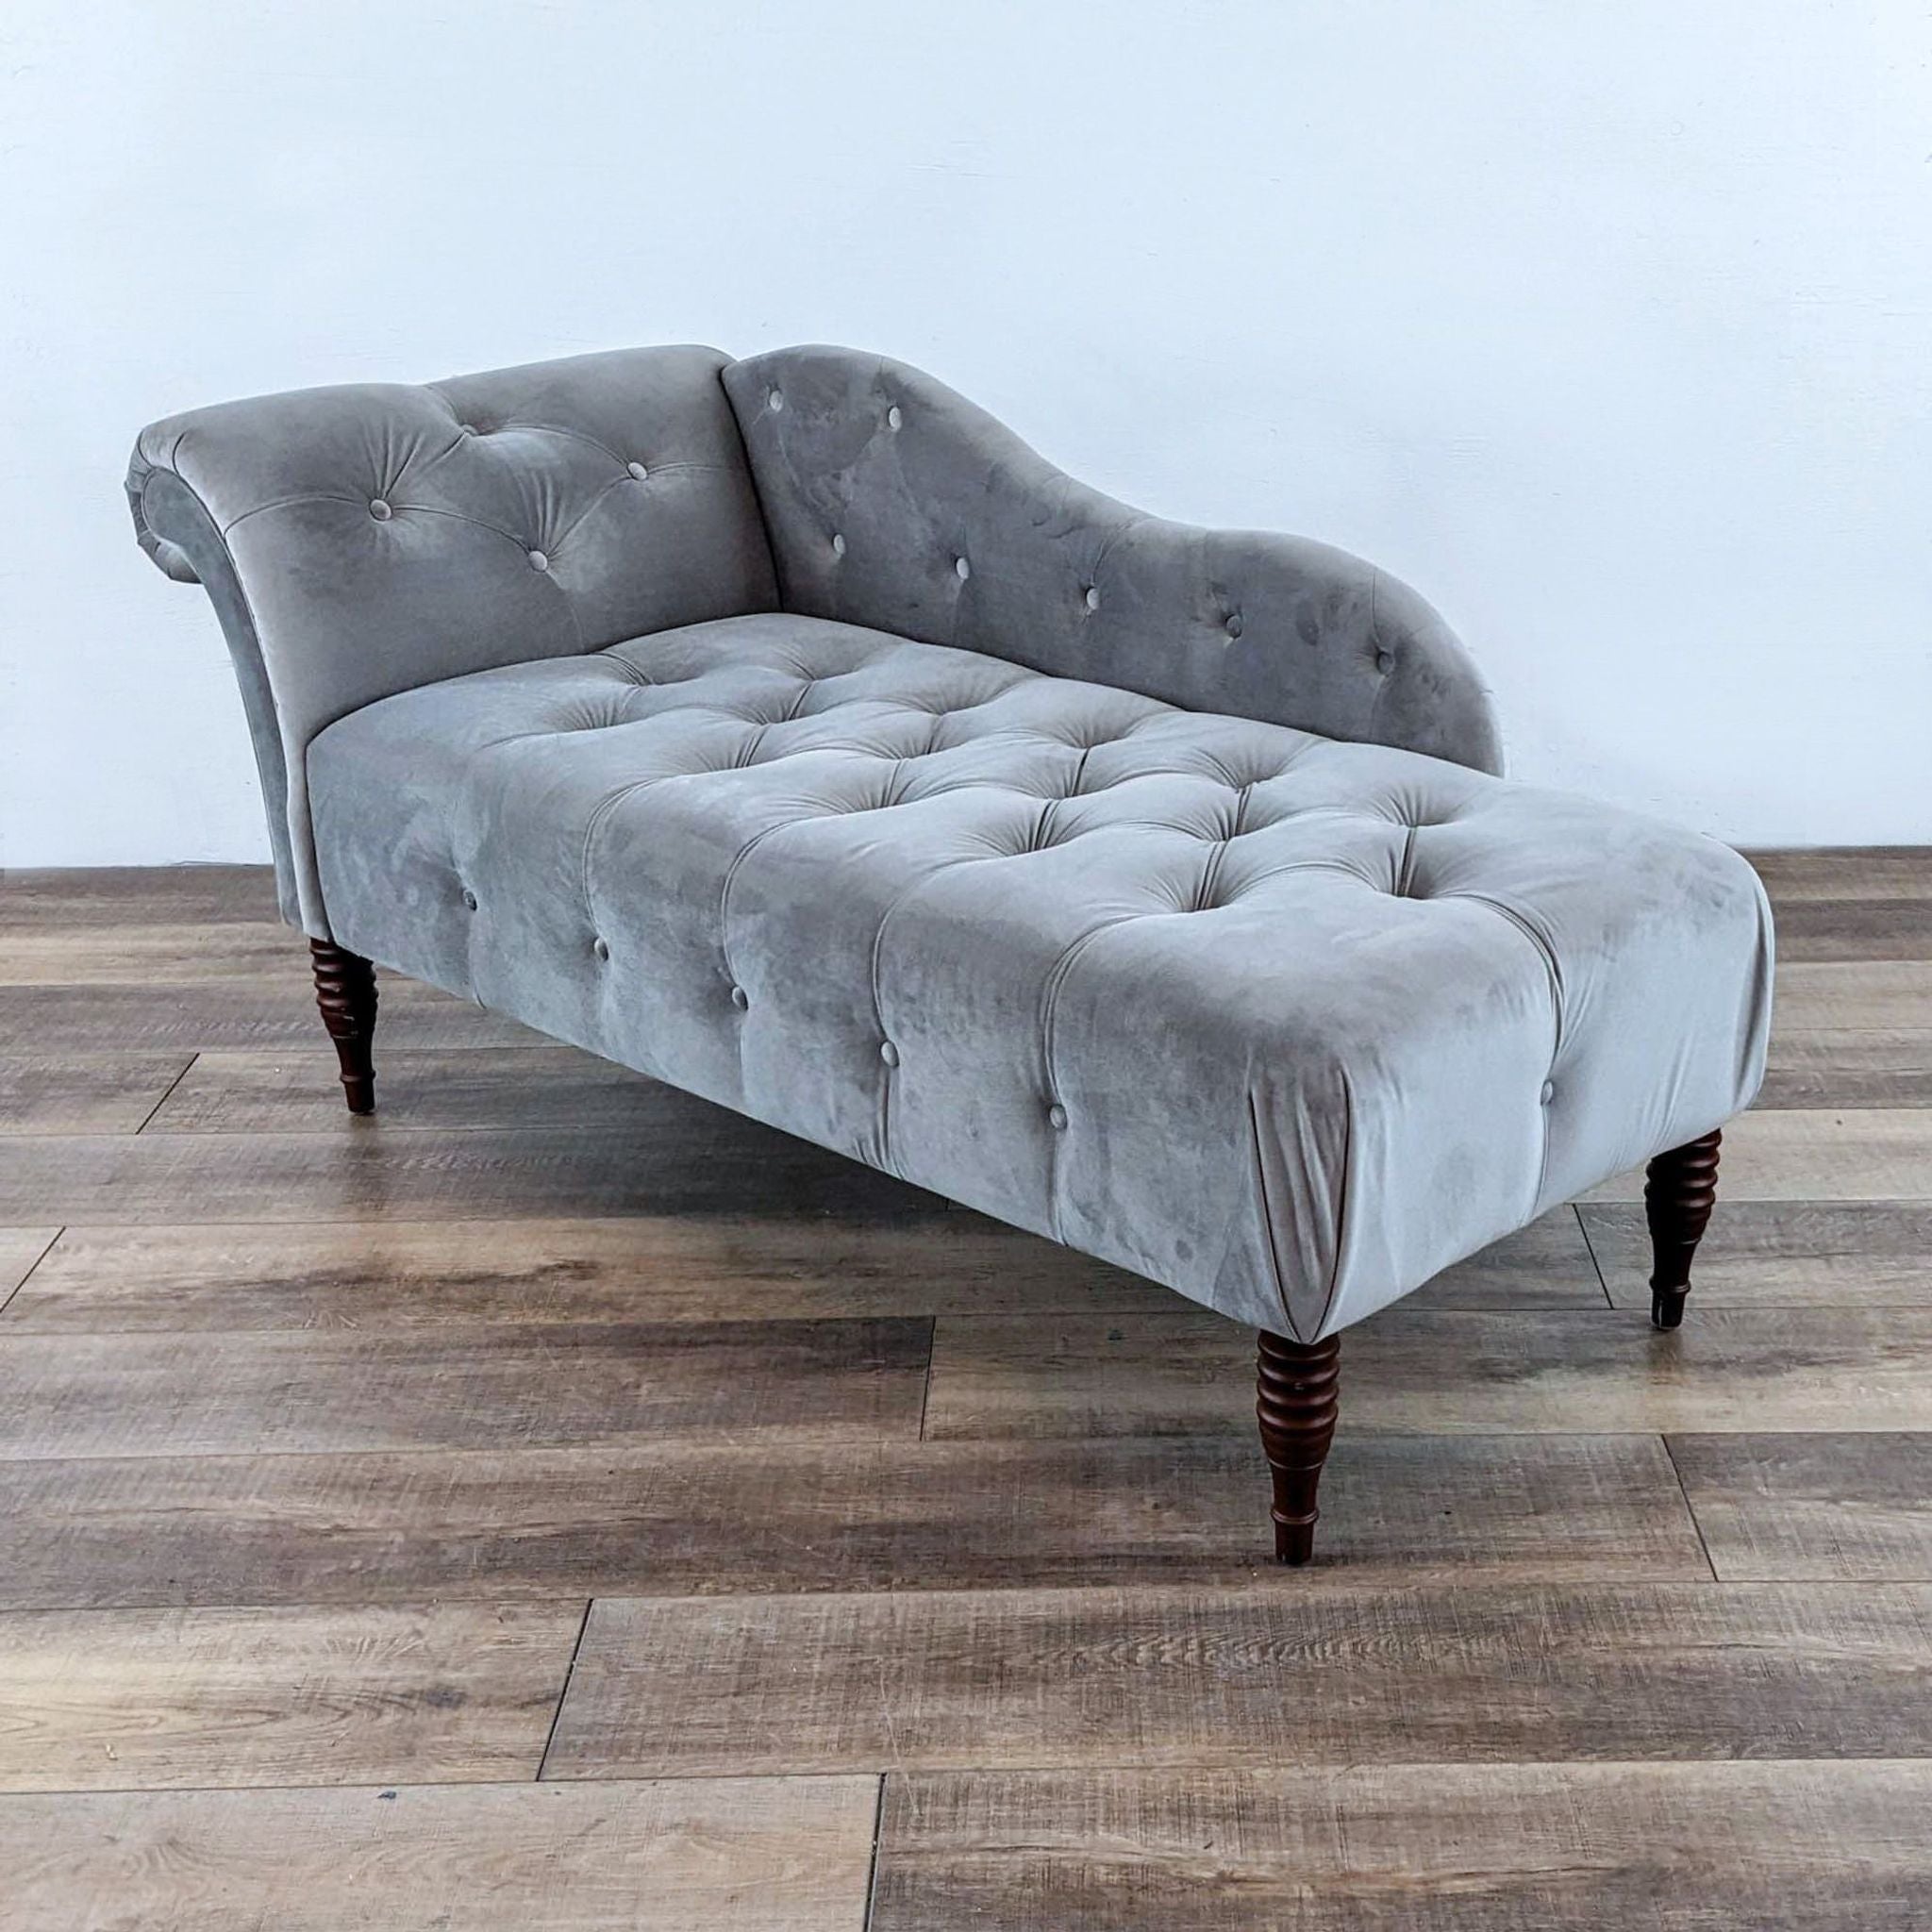 Alt text 1: A Kannon brand vintage-style tufted chaise lounge with curved back and wooden spindle legs on a wooden floor.